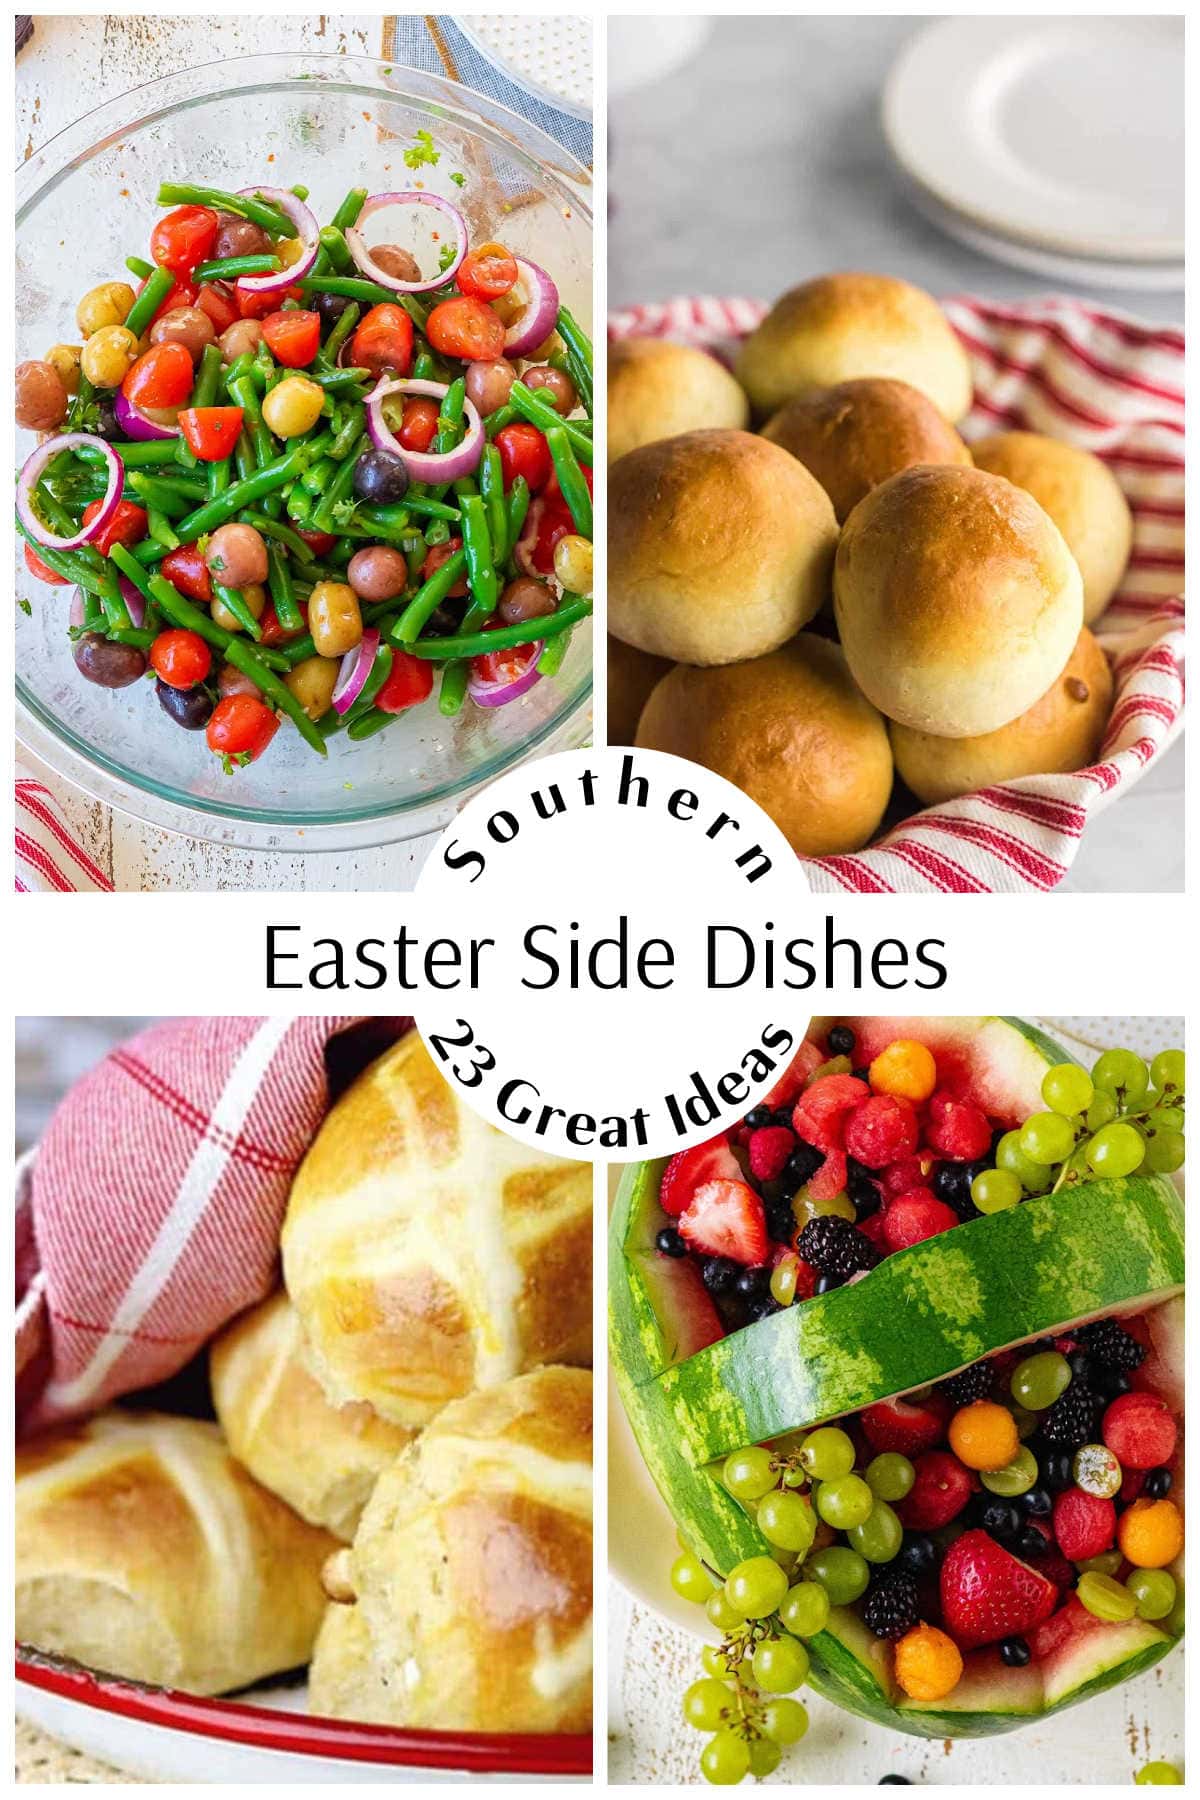 A collage of side dishes with text overlay.